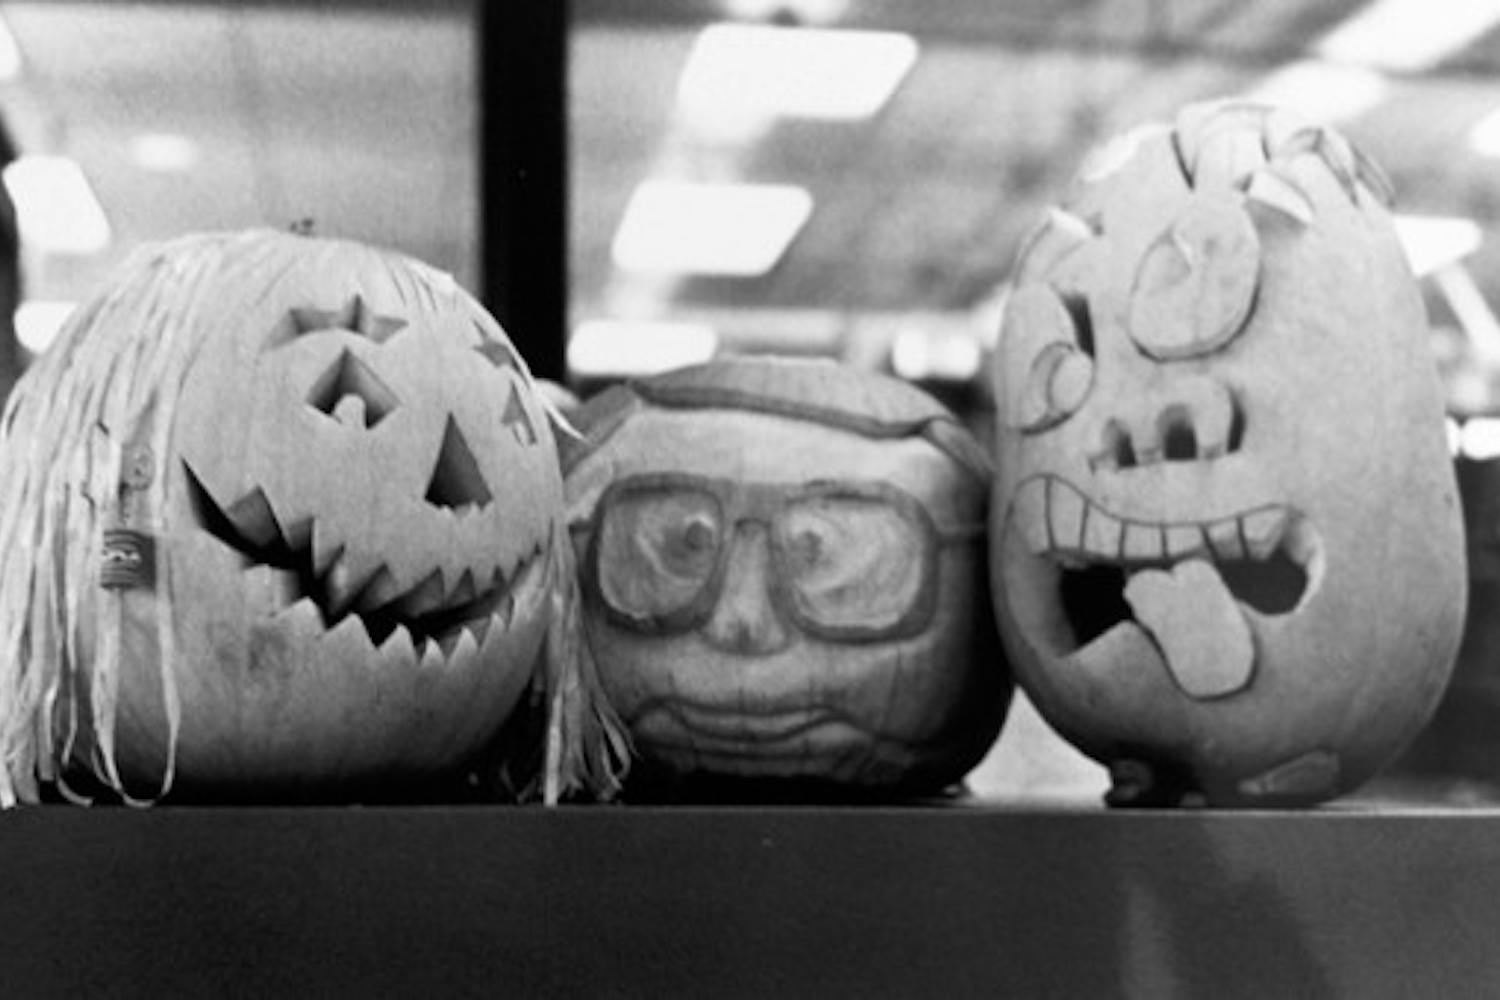 PUMPKIN ART: Carved pumpkins decorate the architecture building for Halloween in 1990. (Photo by Irwin Daugherty)